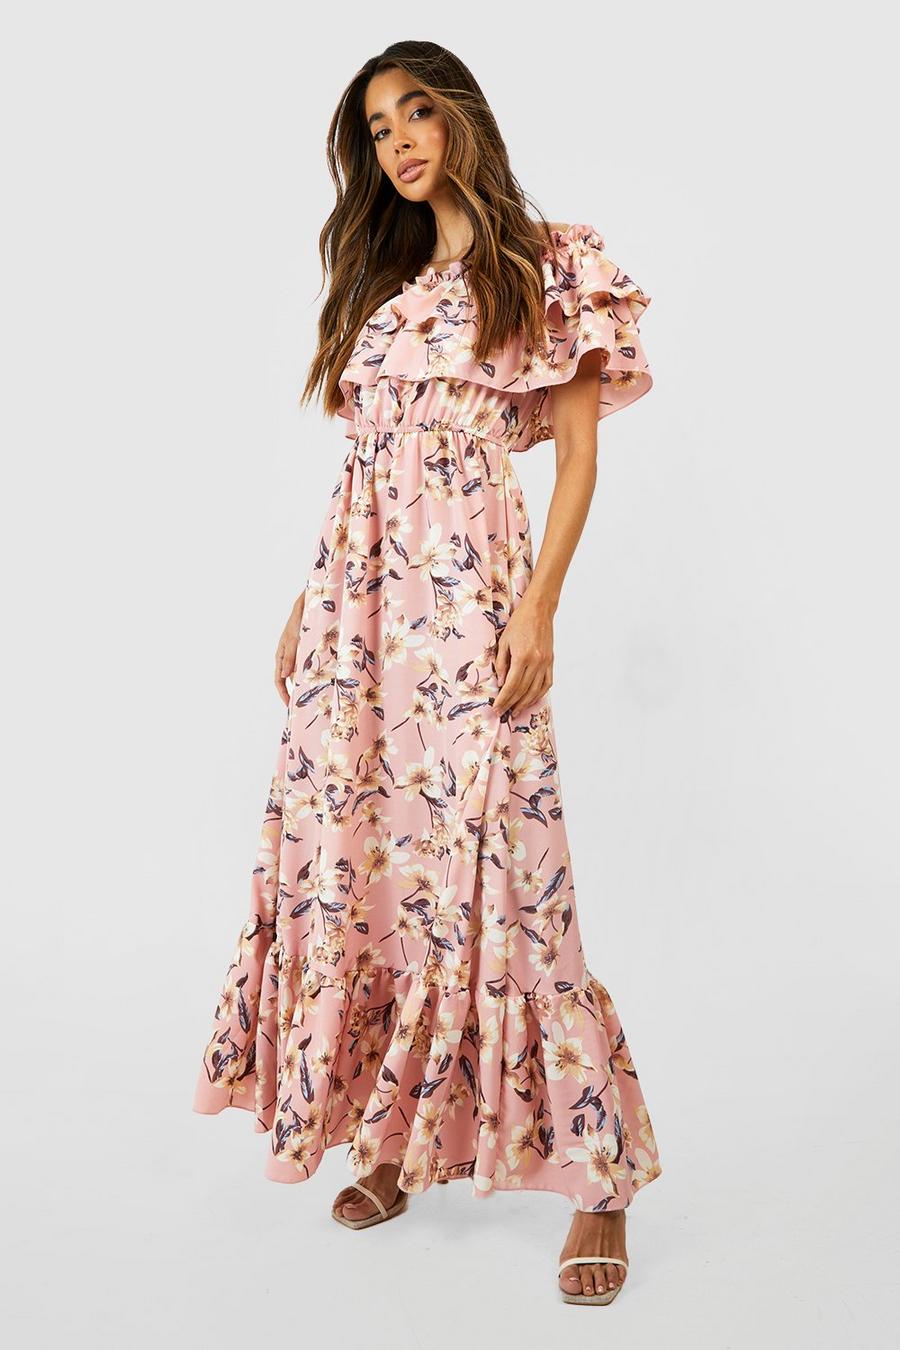 Blush Floral Ruffle Off The Shoulder Maxi Dress